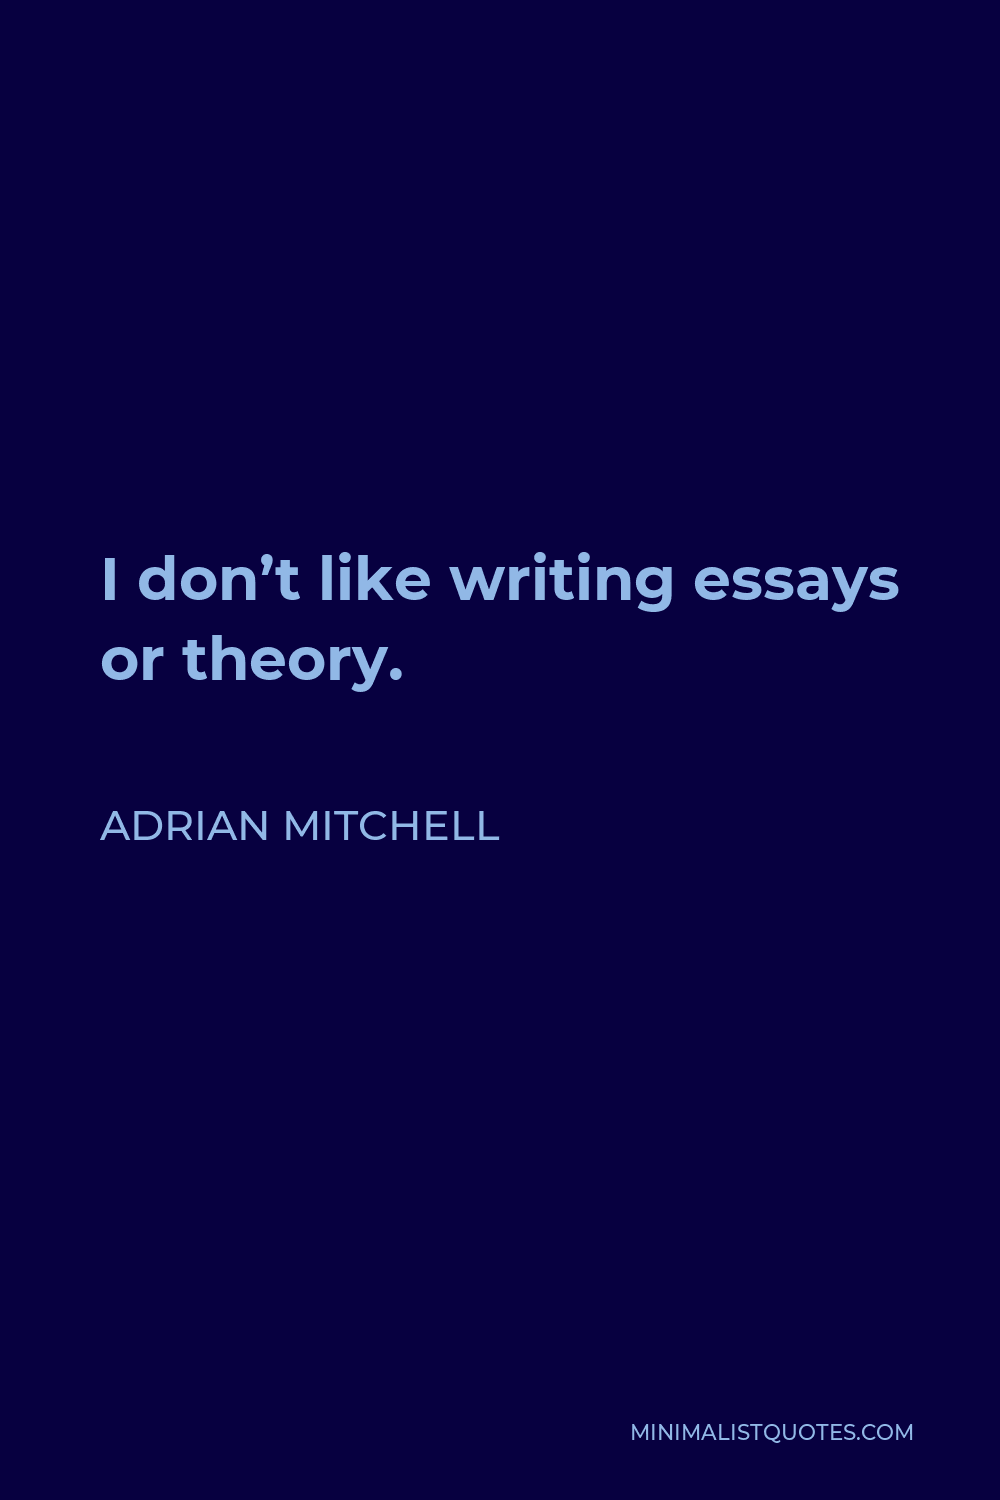 Adrian Mitchell Quote - I don’t like writing essays or theory.